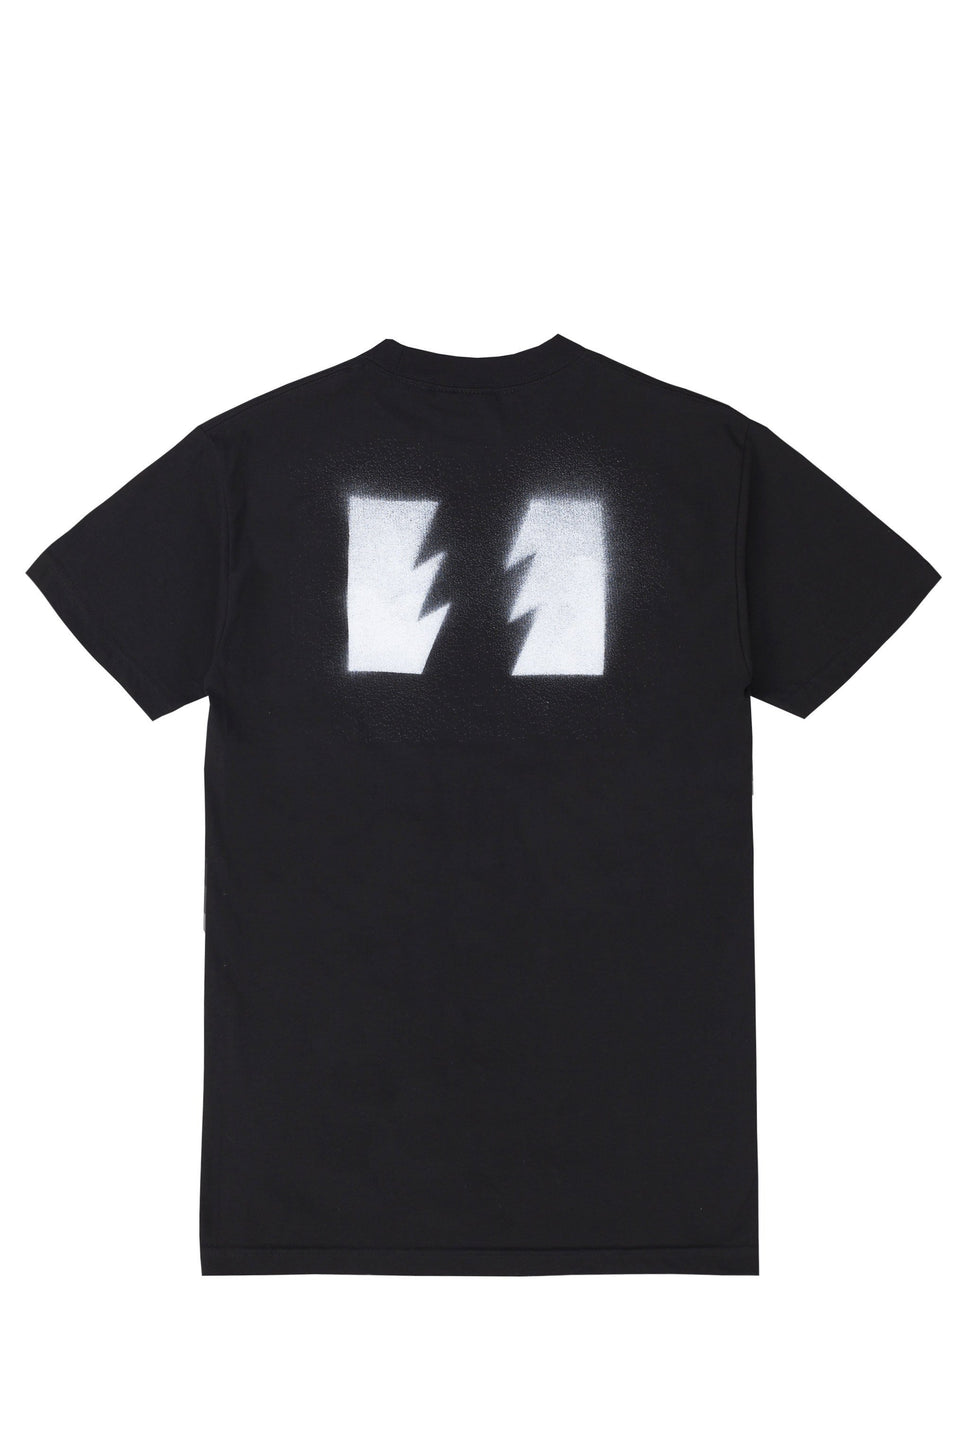 Graphic T-Shirts – The Hundreds